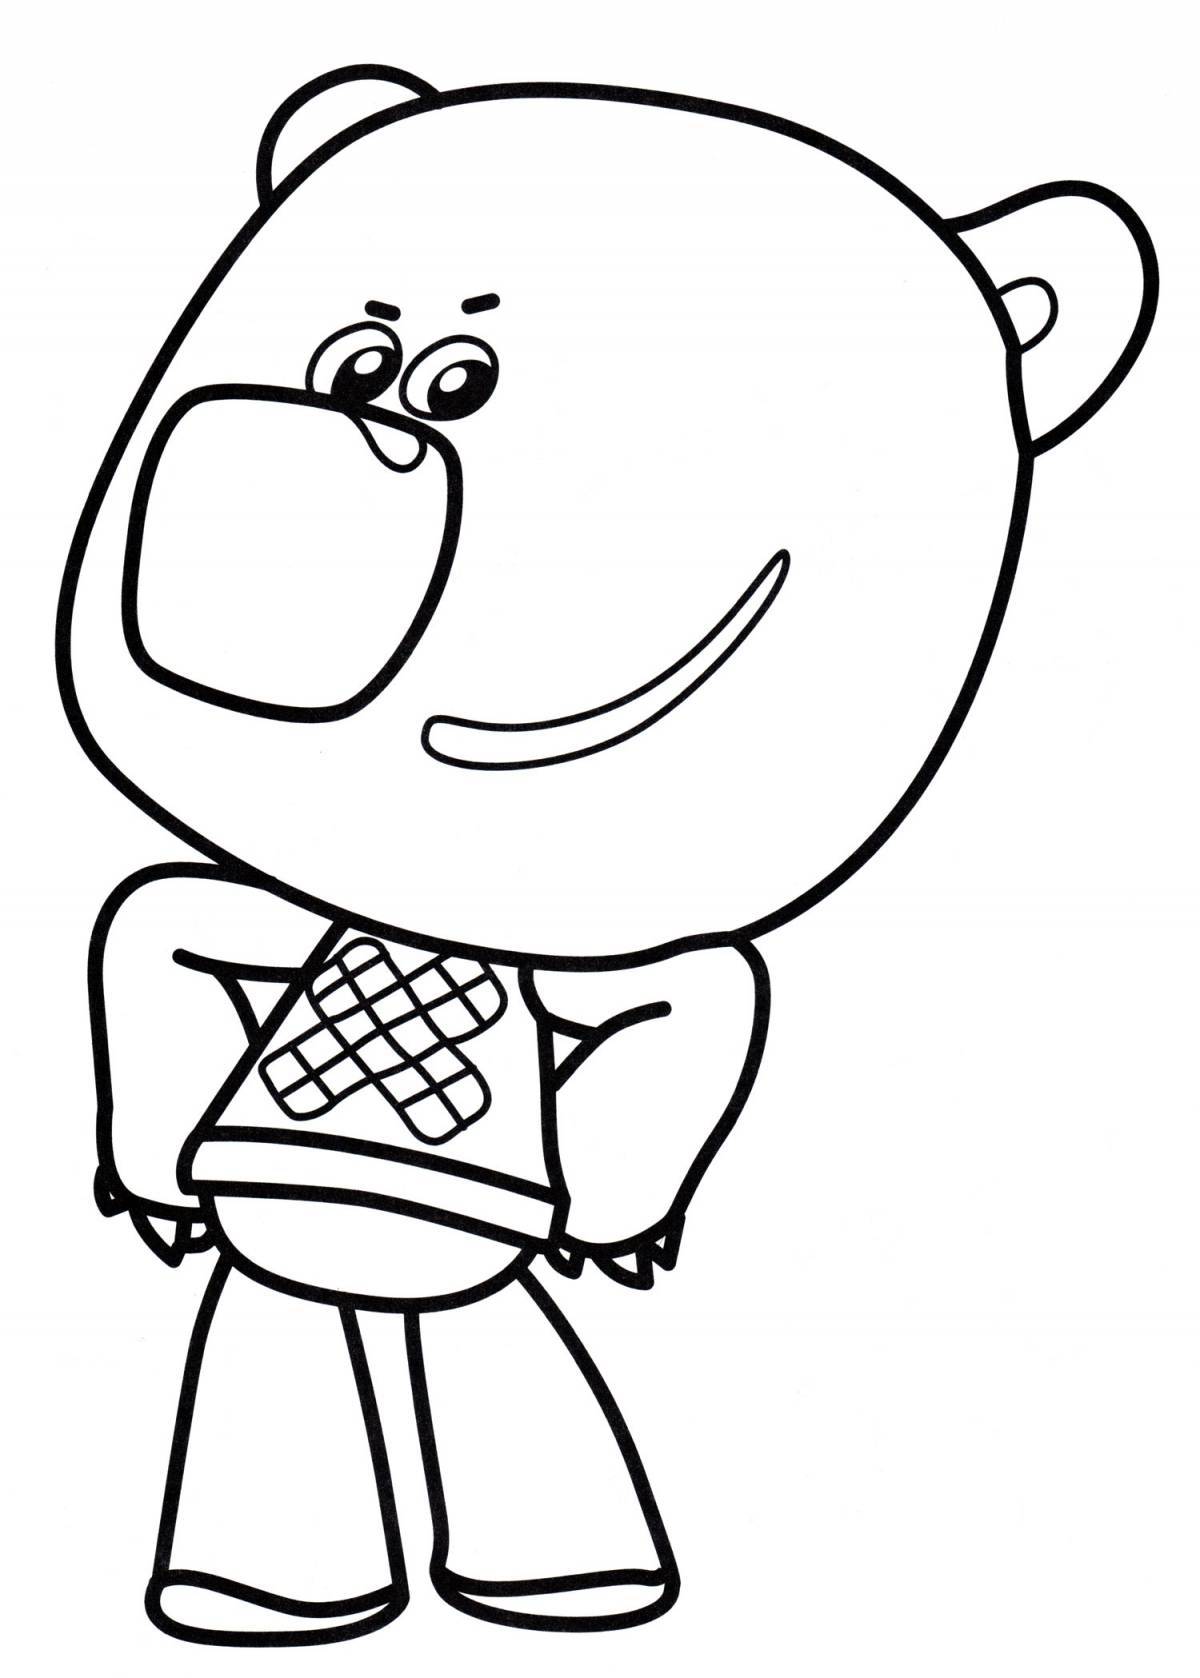 Teddy bear coloring pages